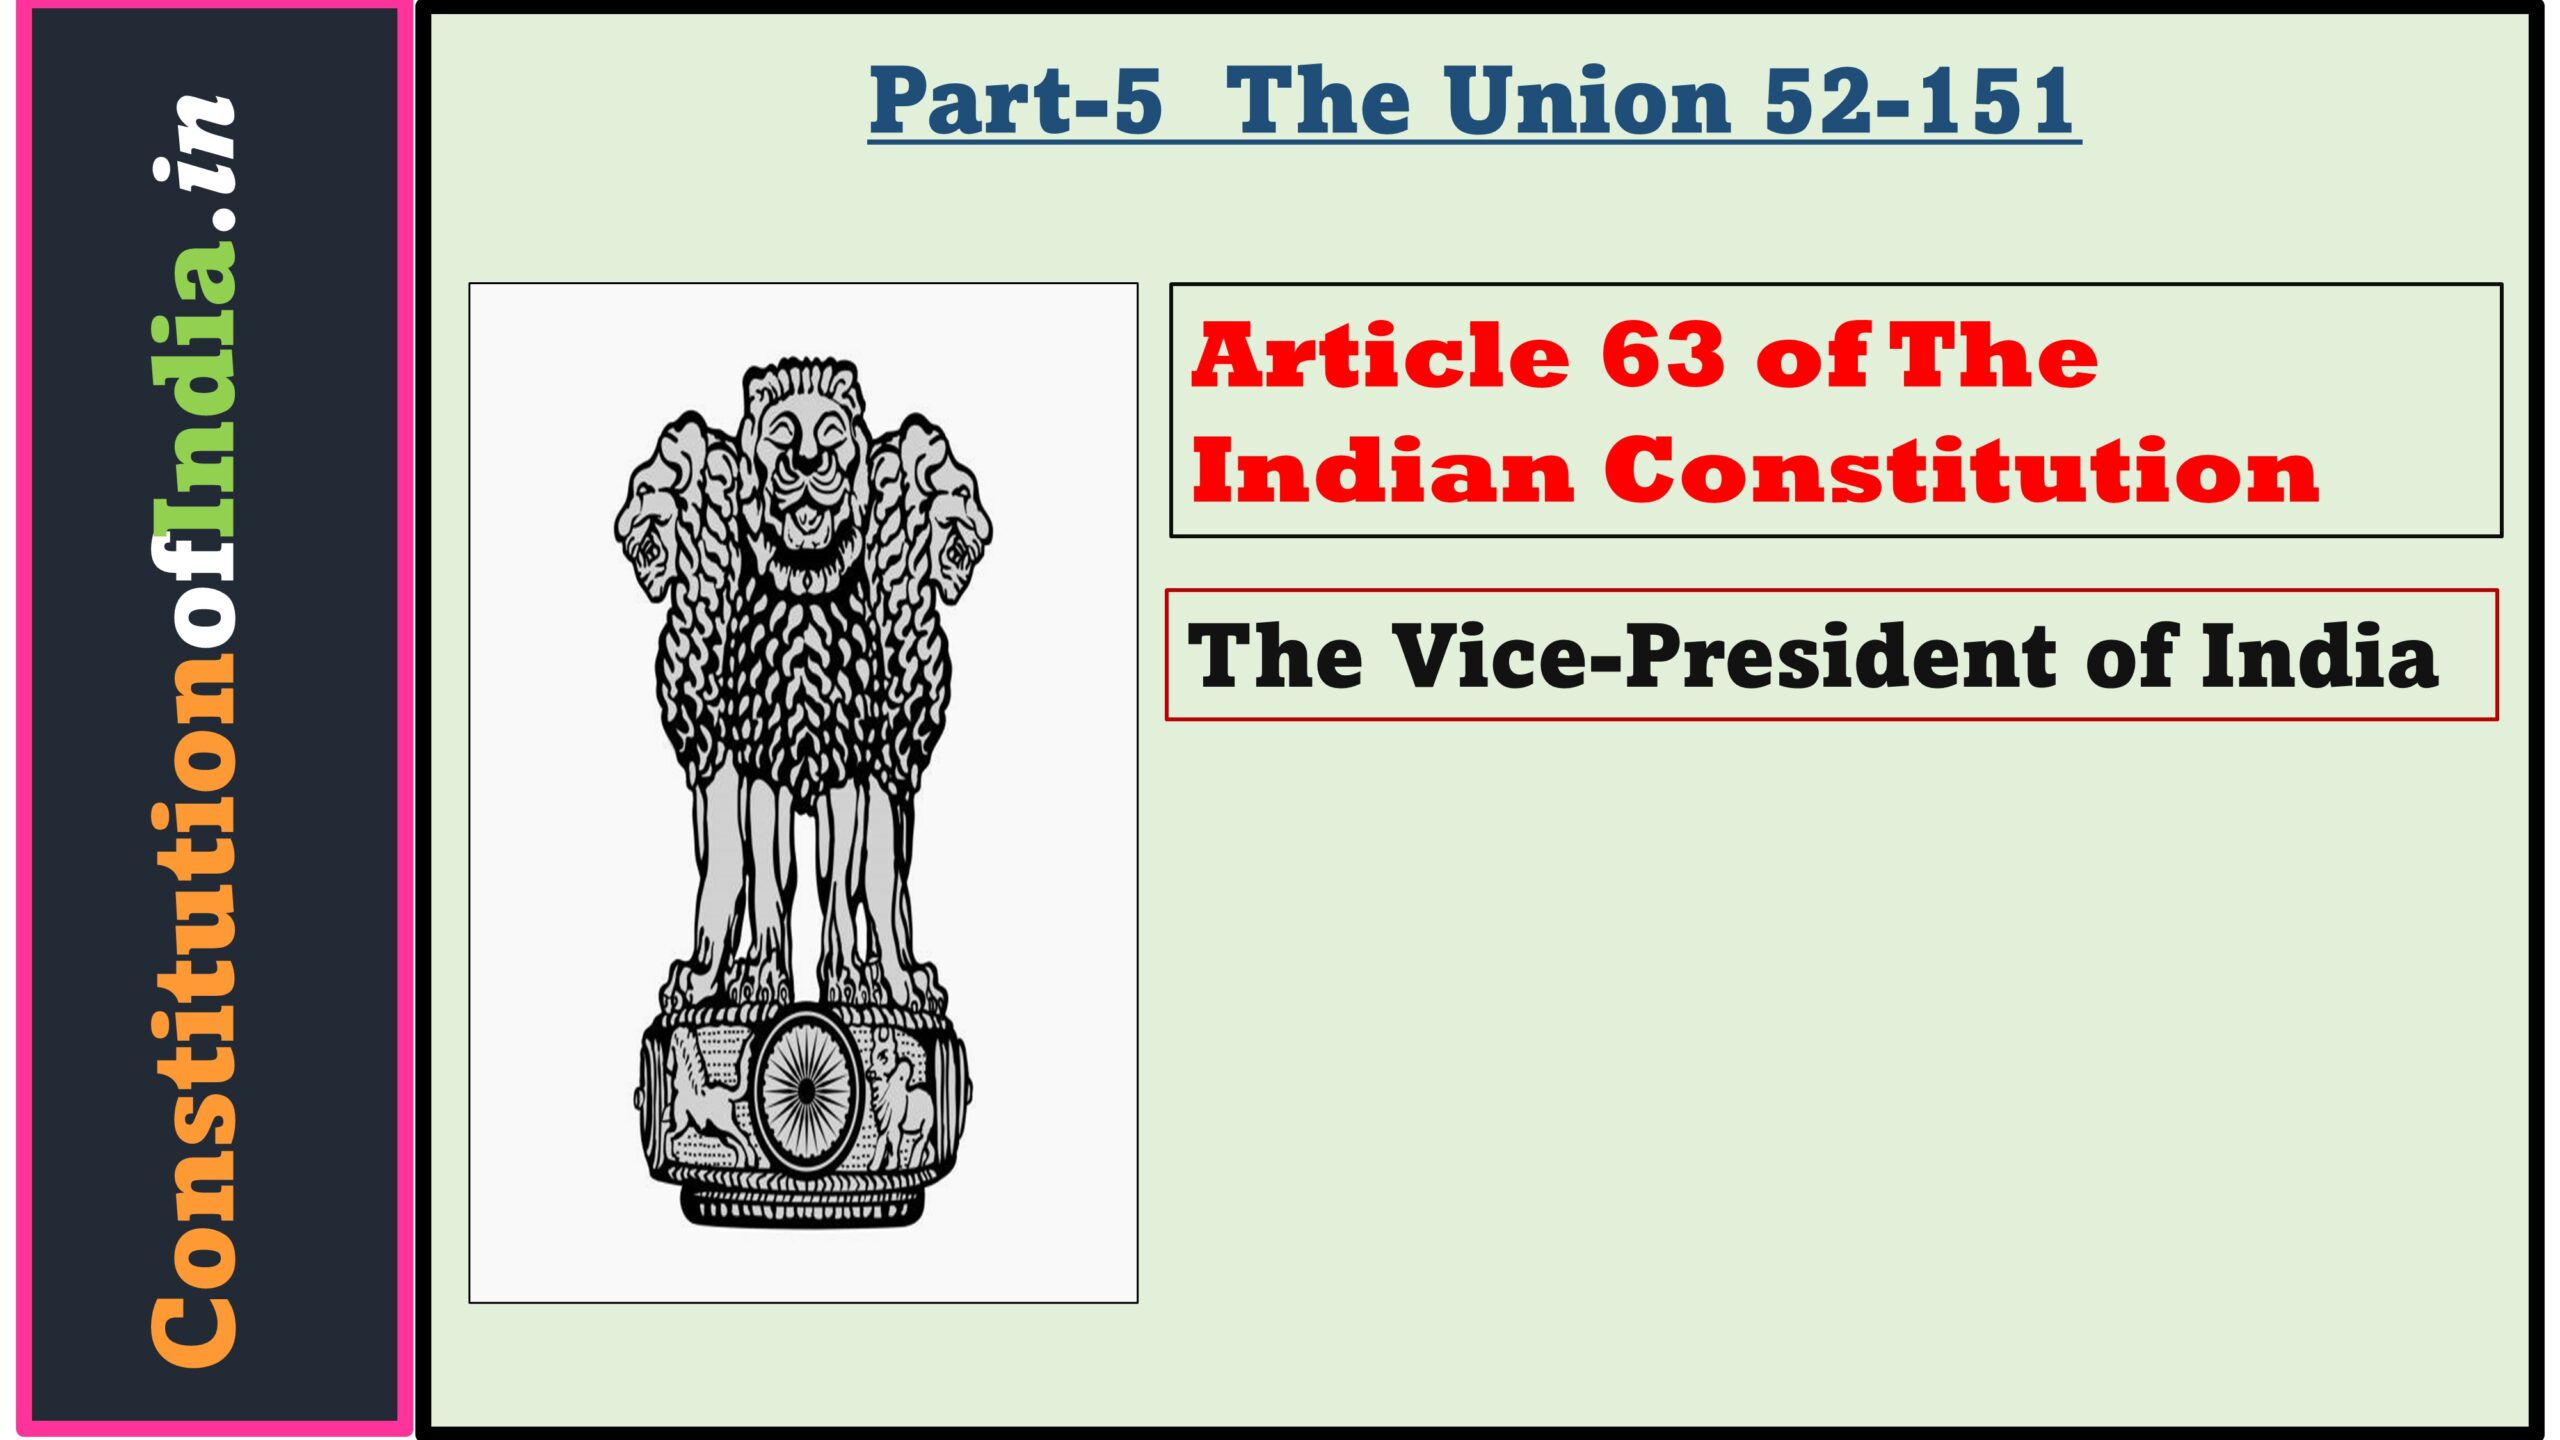 Article 63 of Indian Constitution The Vice-President of India.